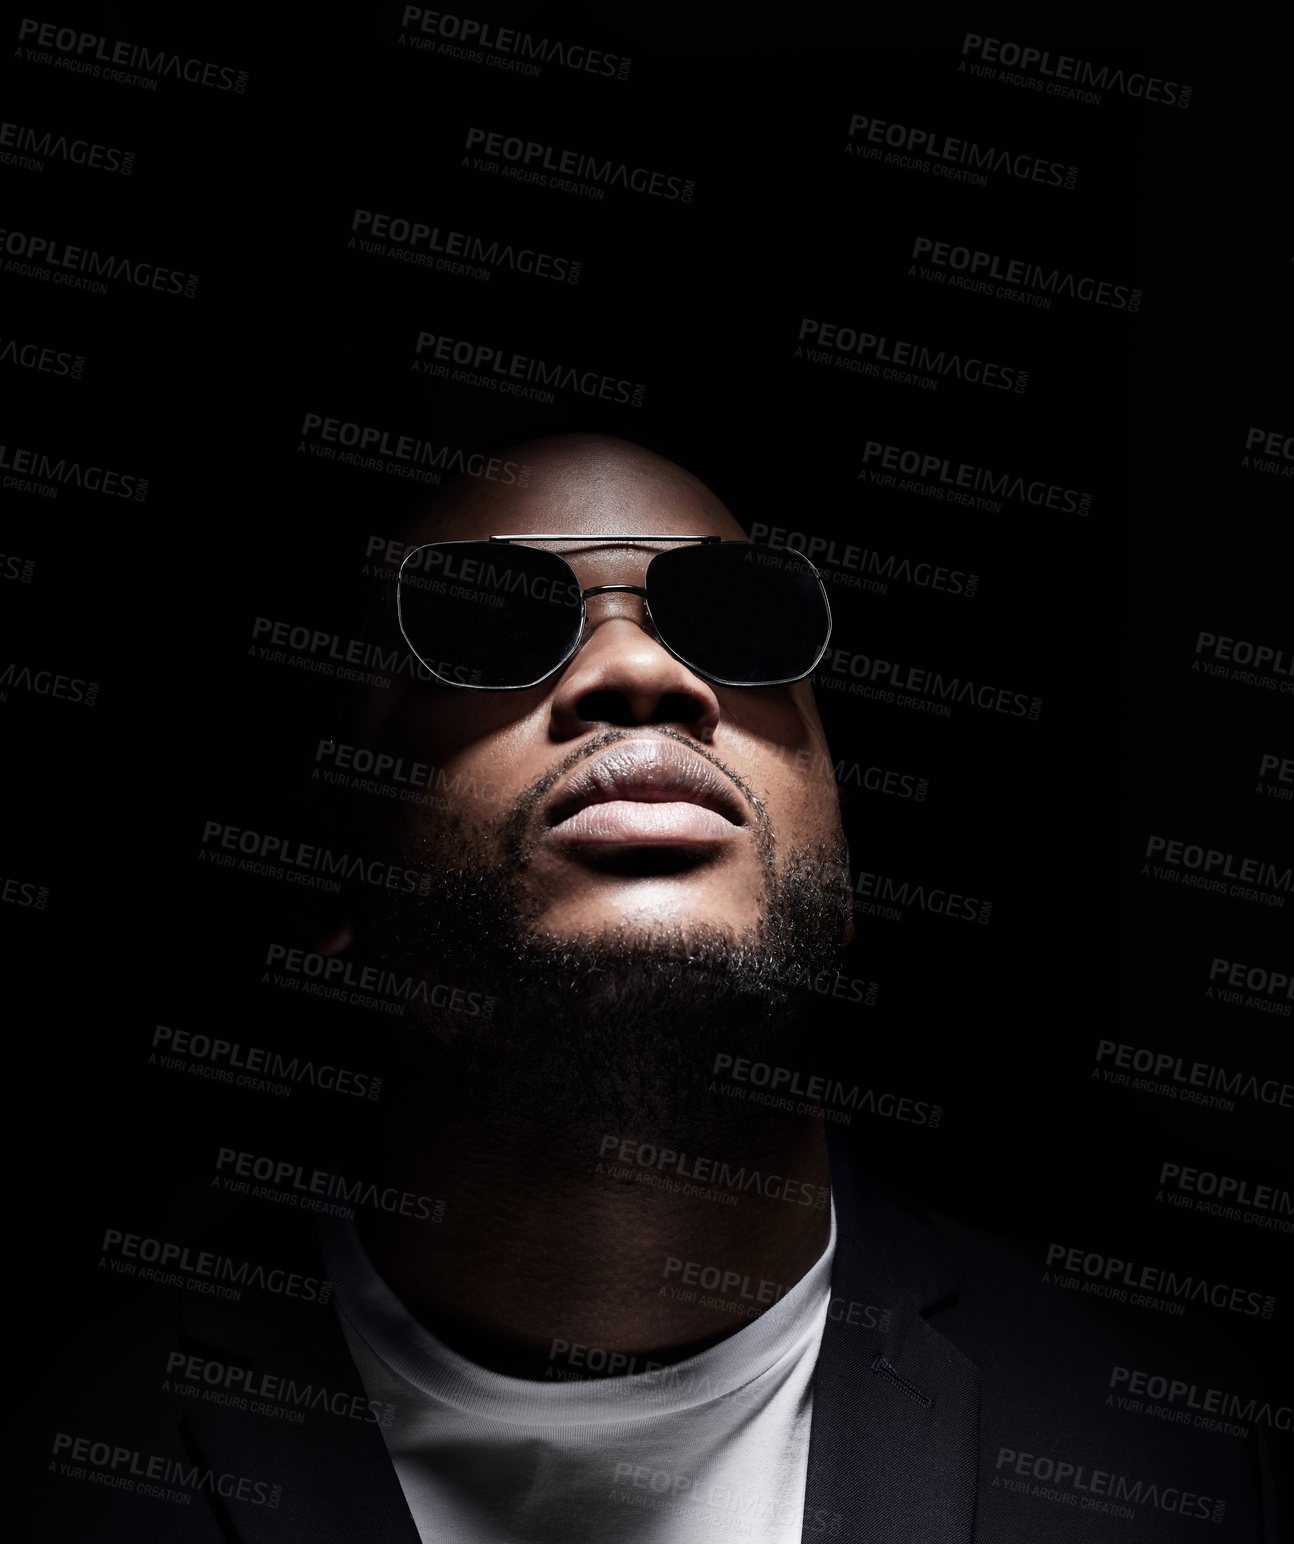 Buy stock photo Studio shot of a man wearing sunglasses while posing against a dark background